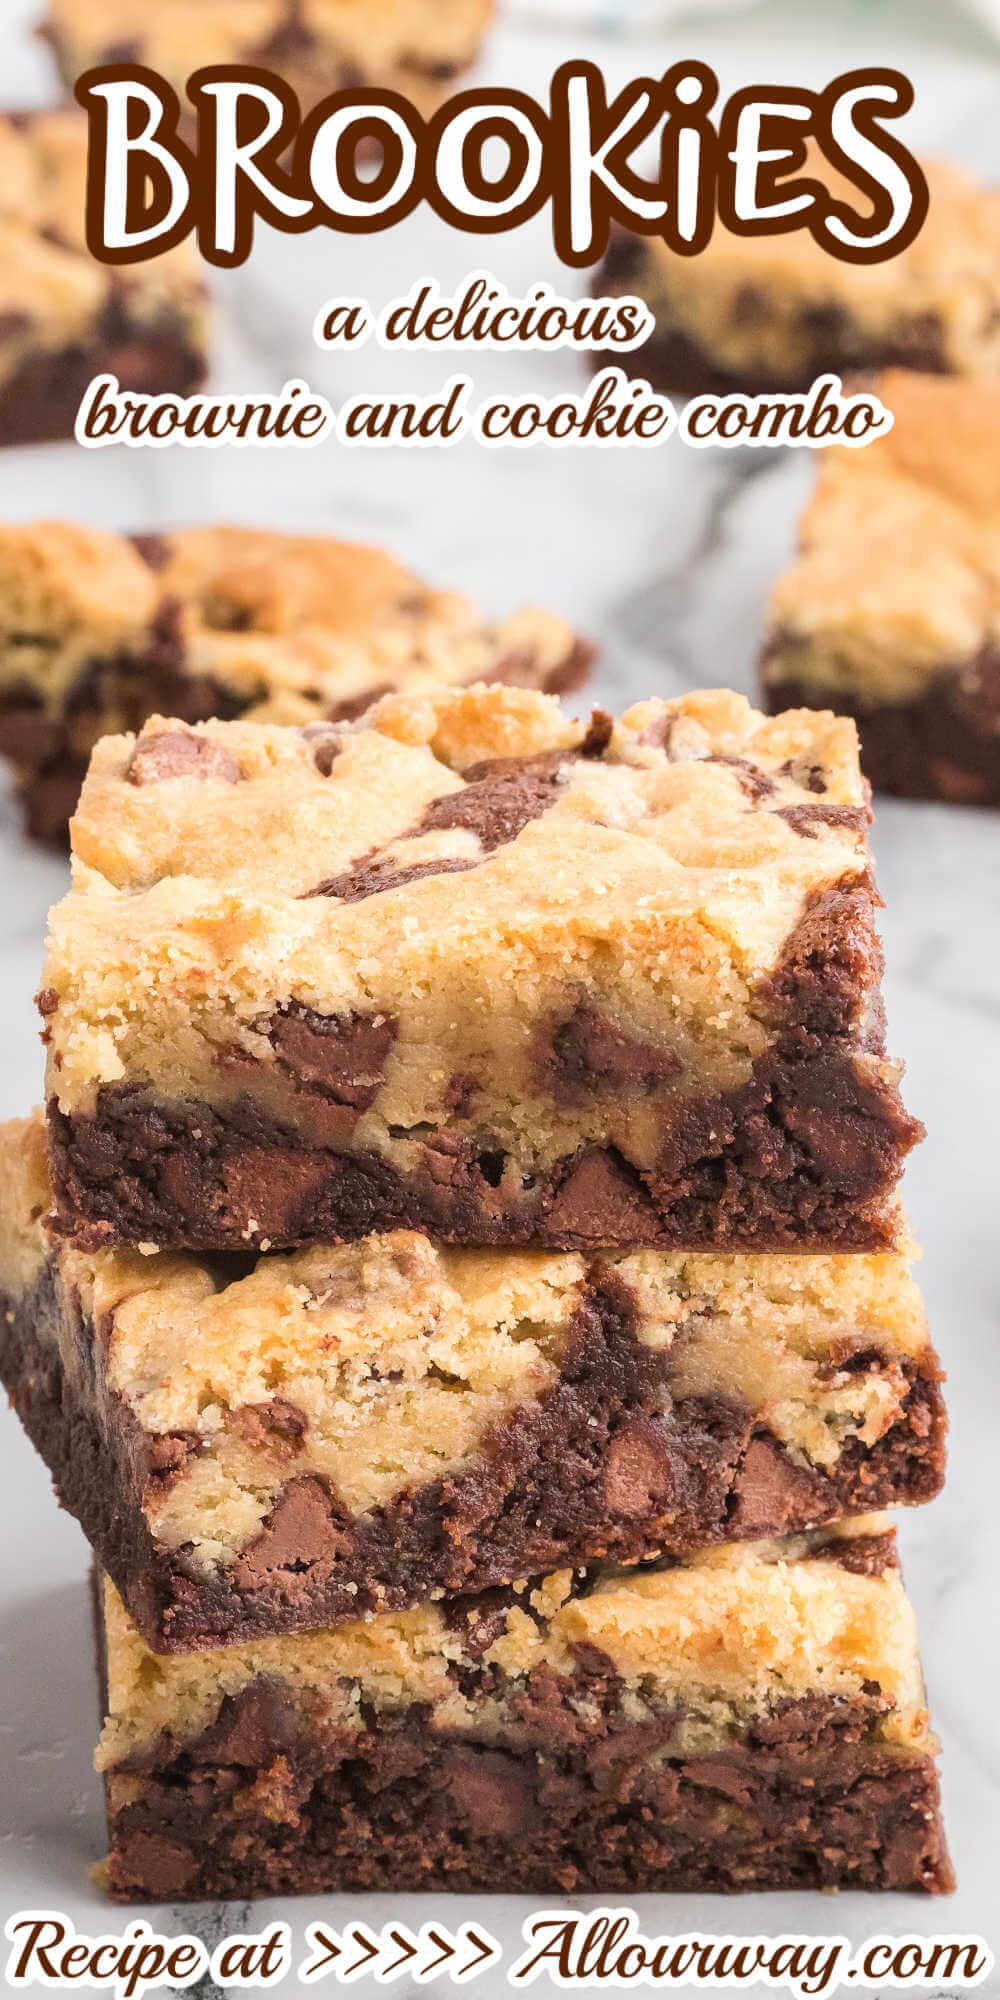 This Brookie recipe is a delicious combination of a chocolate chip cookie and and chewy brownie. This is the best of both flavor worlds. These sweet treats are perfect for lunchbox meals and they are always the first to go at family gatherings. Watch them disappear at potlucks. Everyone loves them.